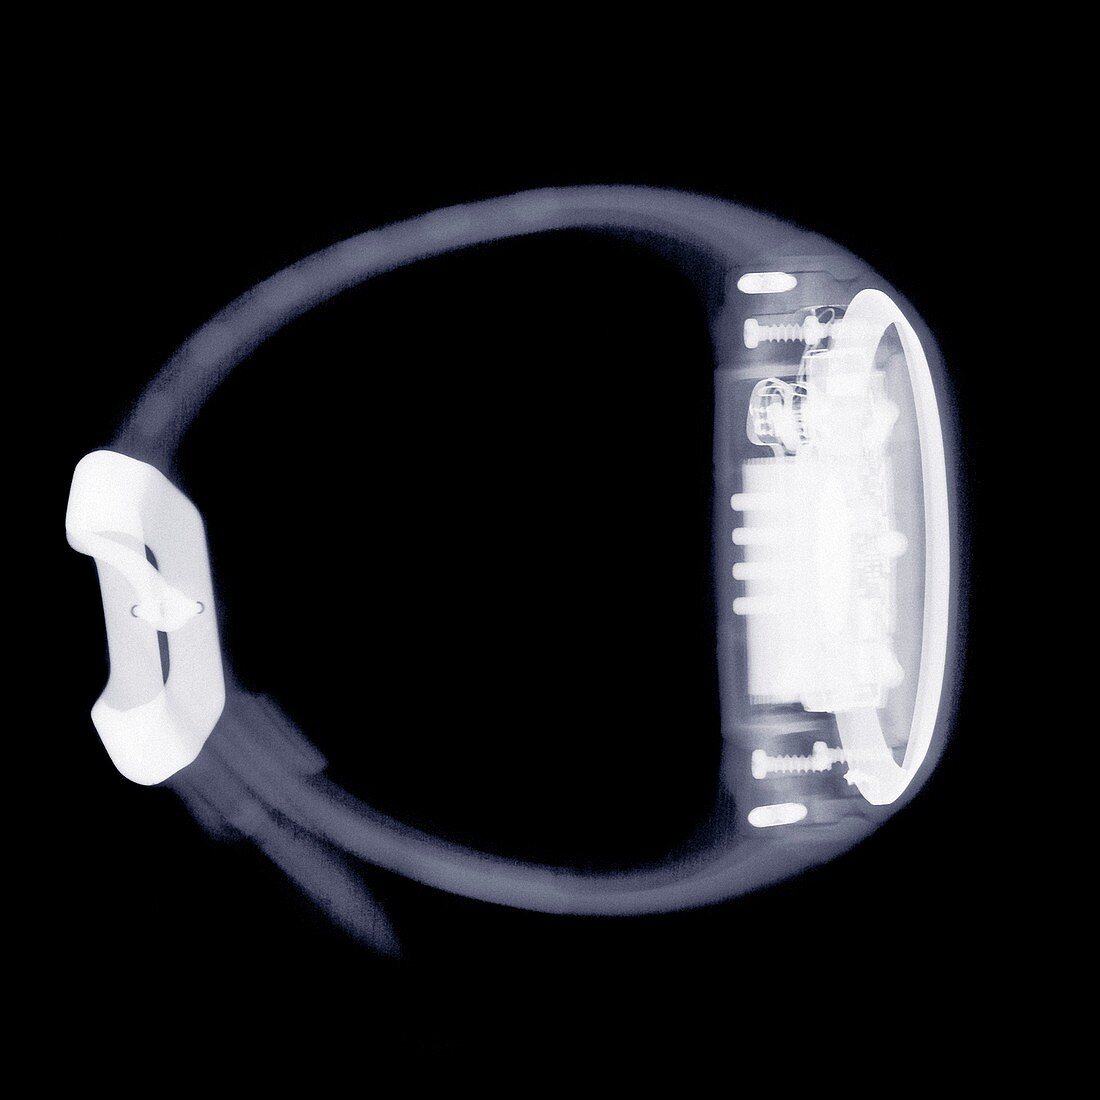 Watch and strap, X-ray